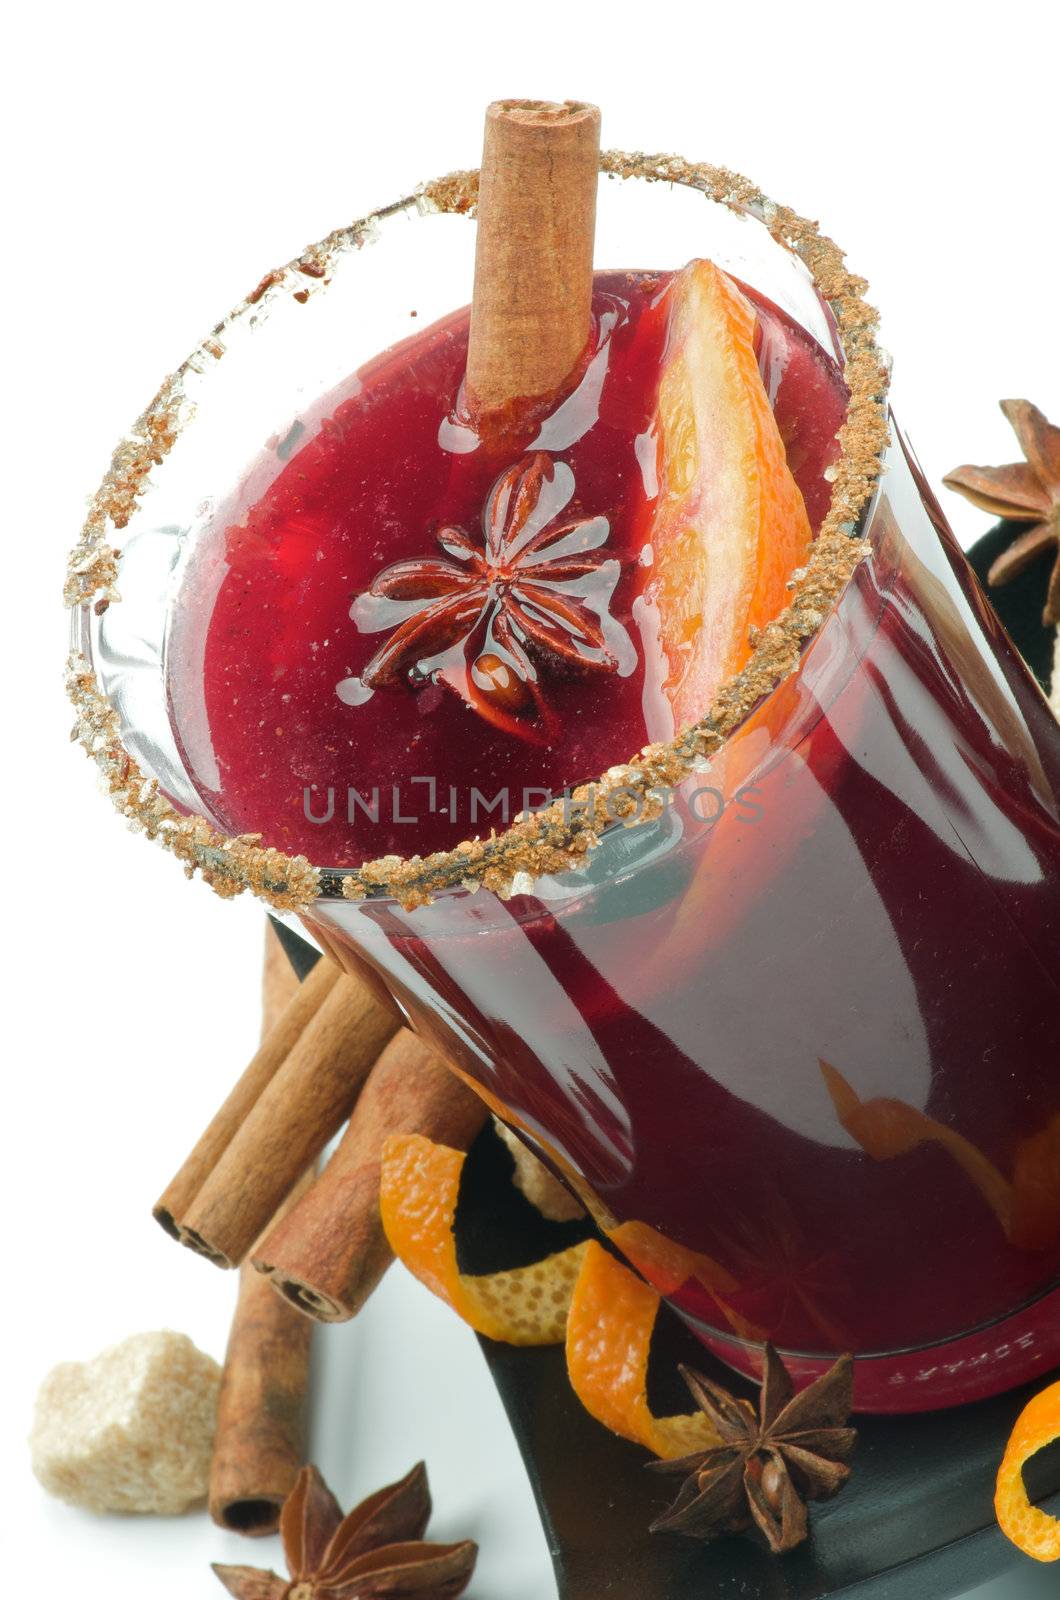 Mulled Wine and Spices by zhekos